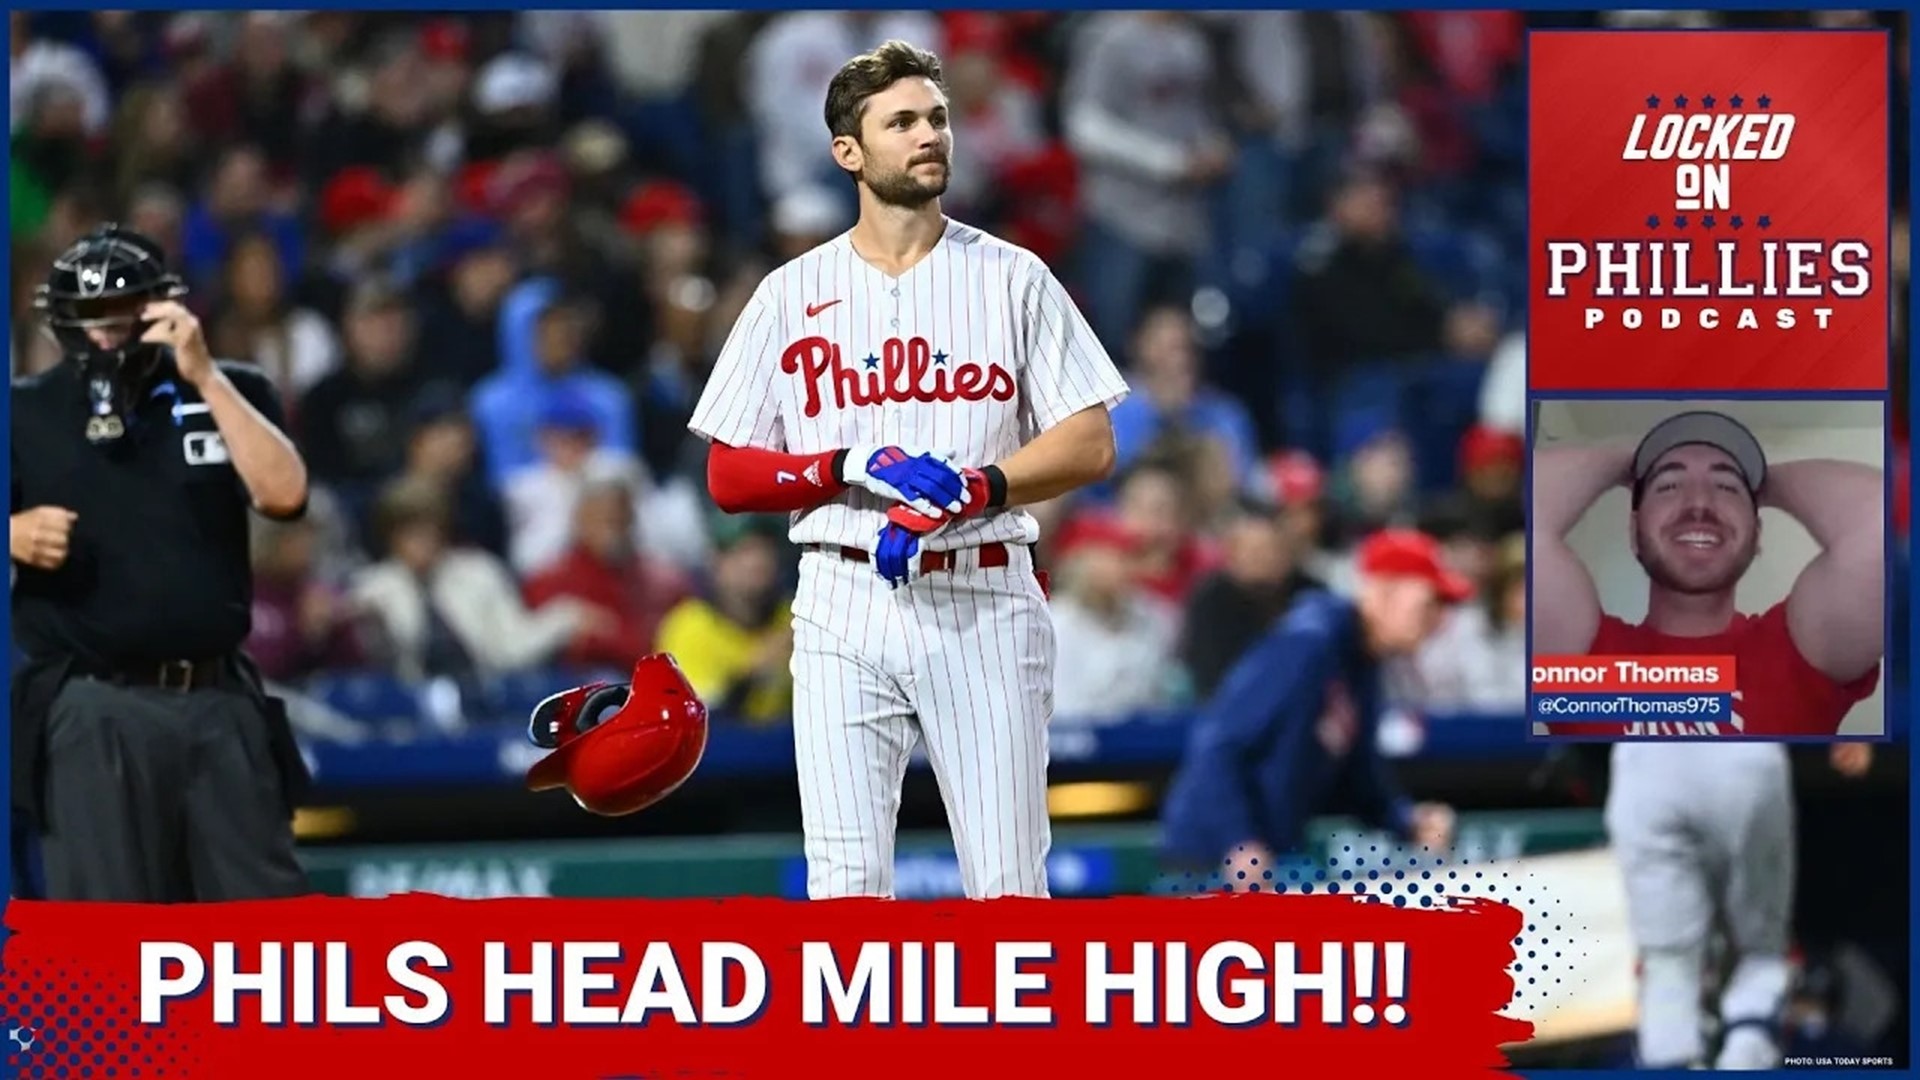 In today's episode, Connor previews the Philadelphia Phillies' series with the Colorado Rockies.